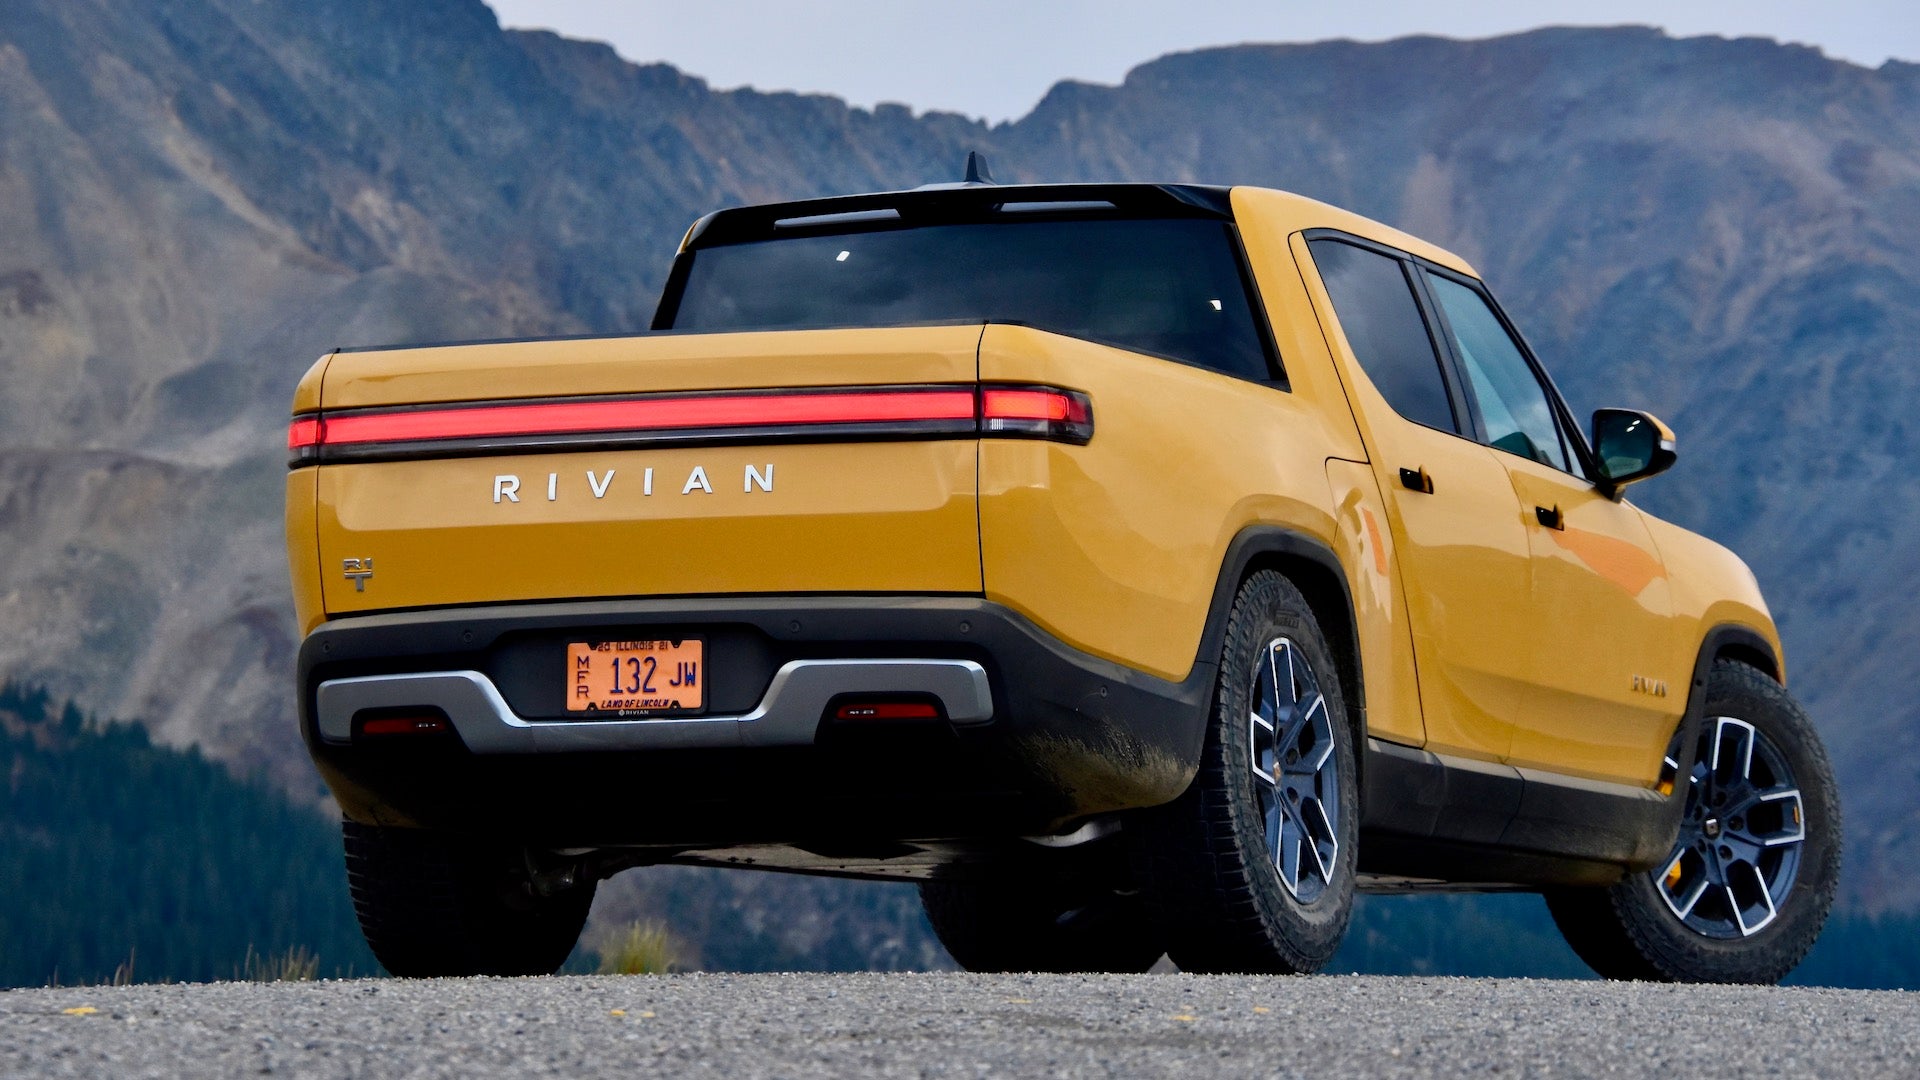 The Rivian R1T, equipped with a ‘Max Pack’ battery that can travel up to 410 miles, has been released.